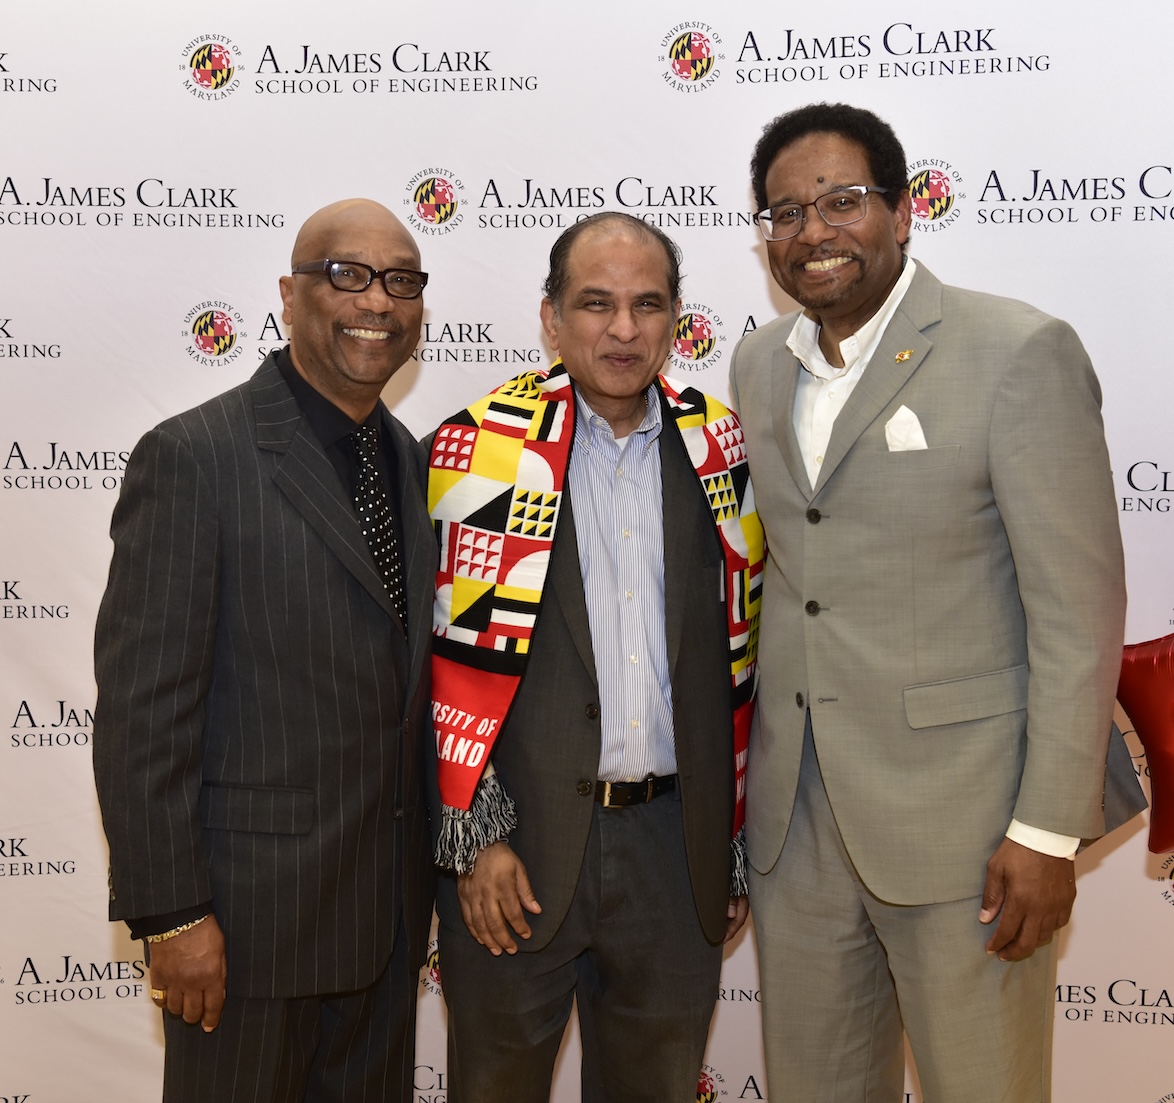 From left: UMD Mechanical Engineering Academic Advisor and Manager for Outreach and Recruitment, Fitzgerald Walker, former UMD Mechanical Engineering Chair Balakumar Balachandran, and UMD President Darryll Pines.